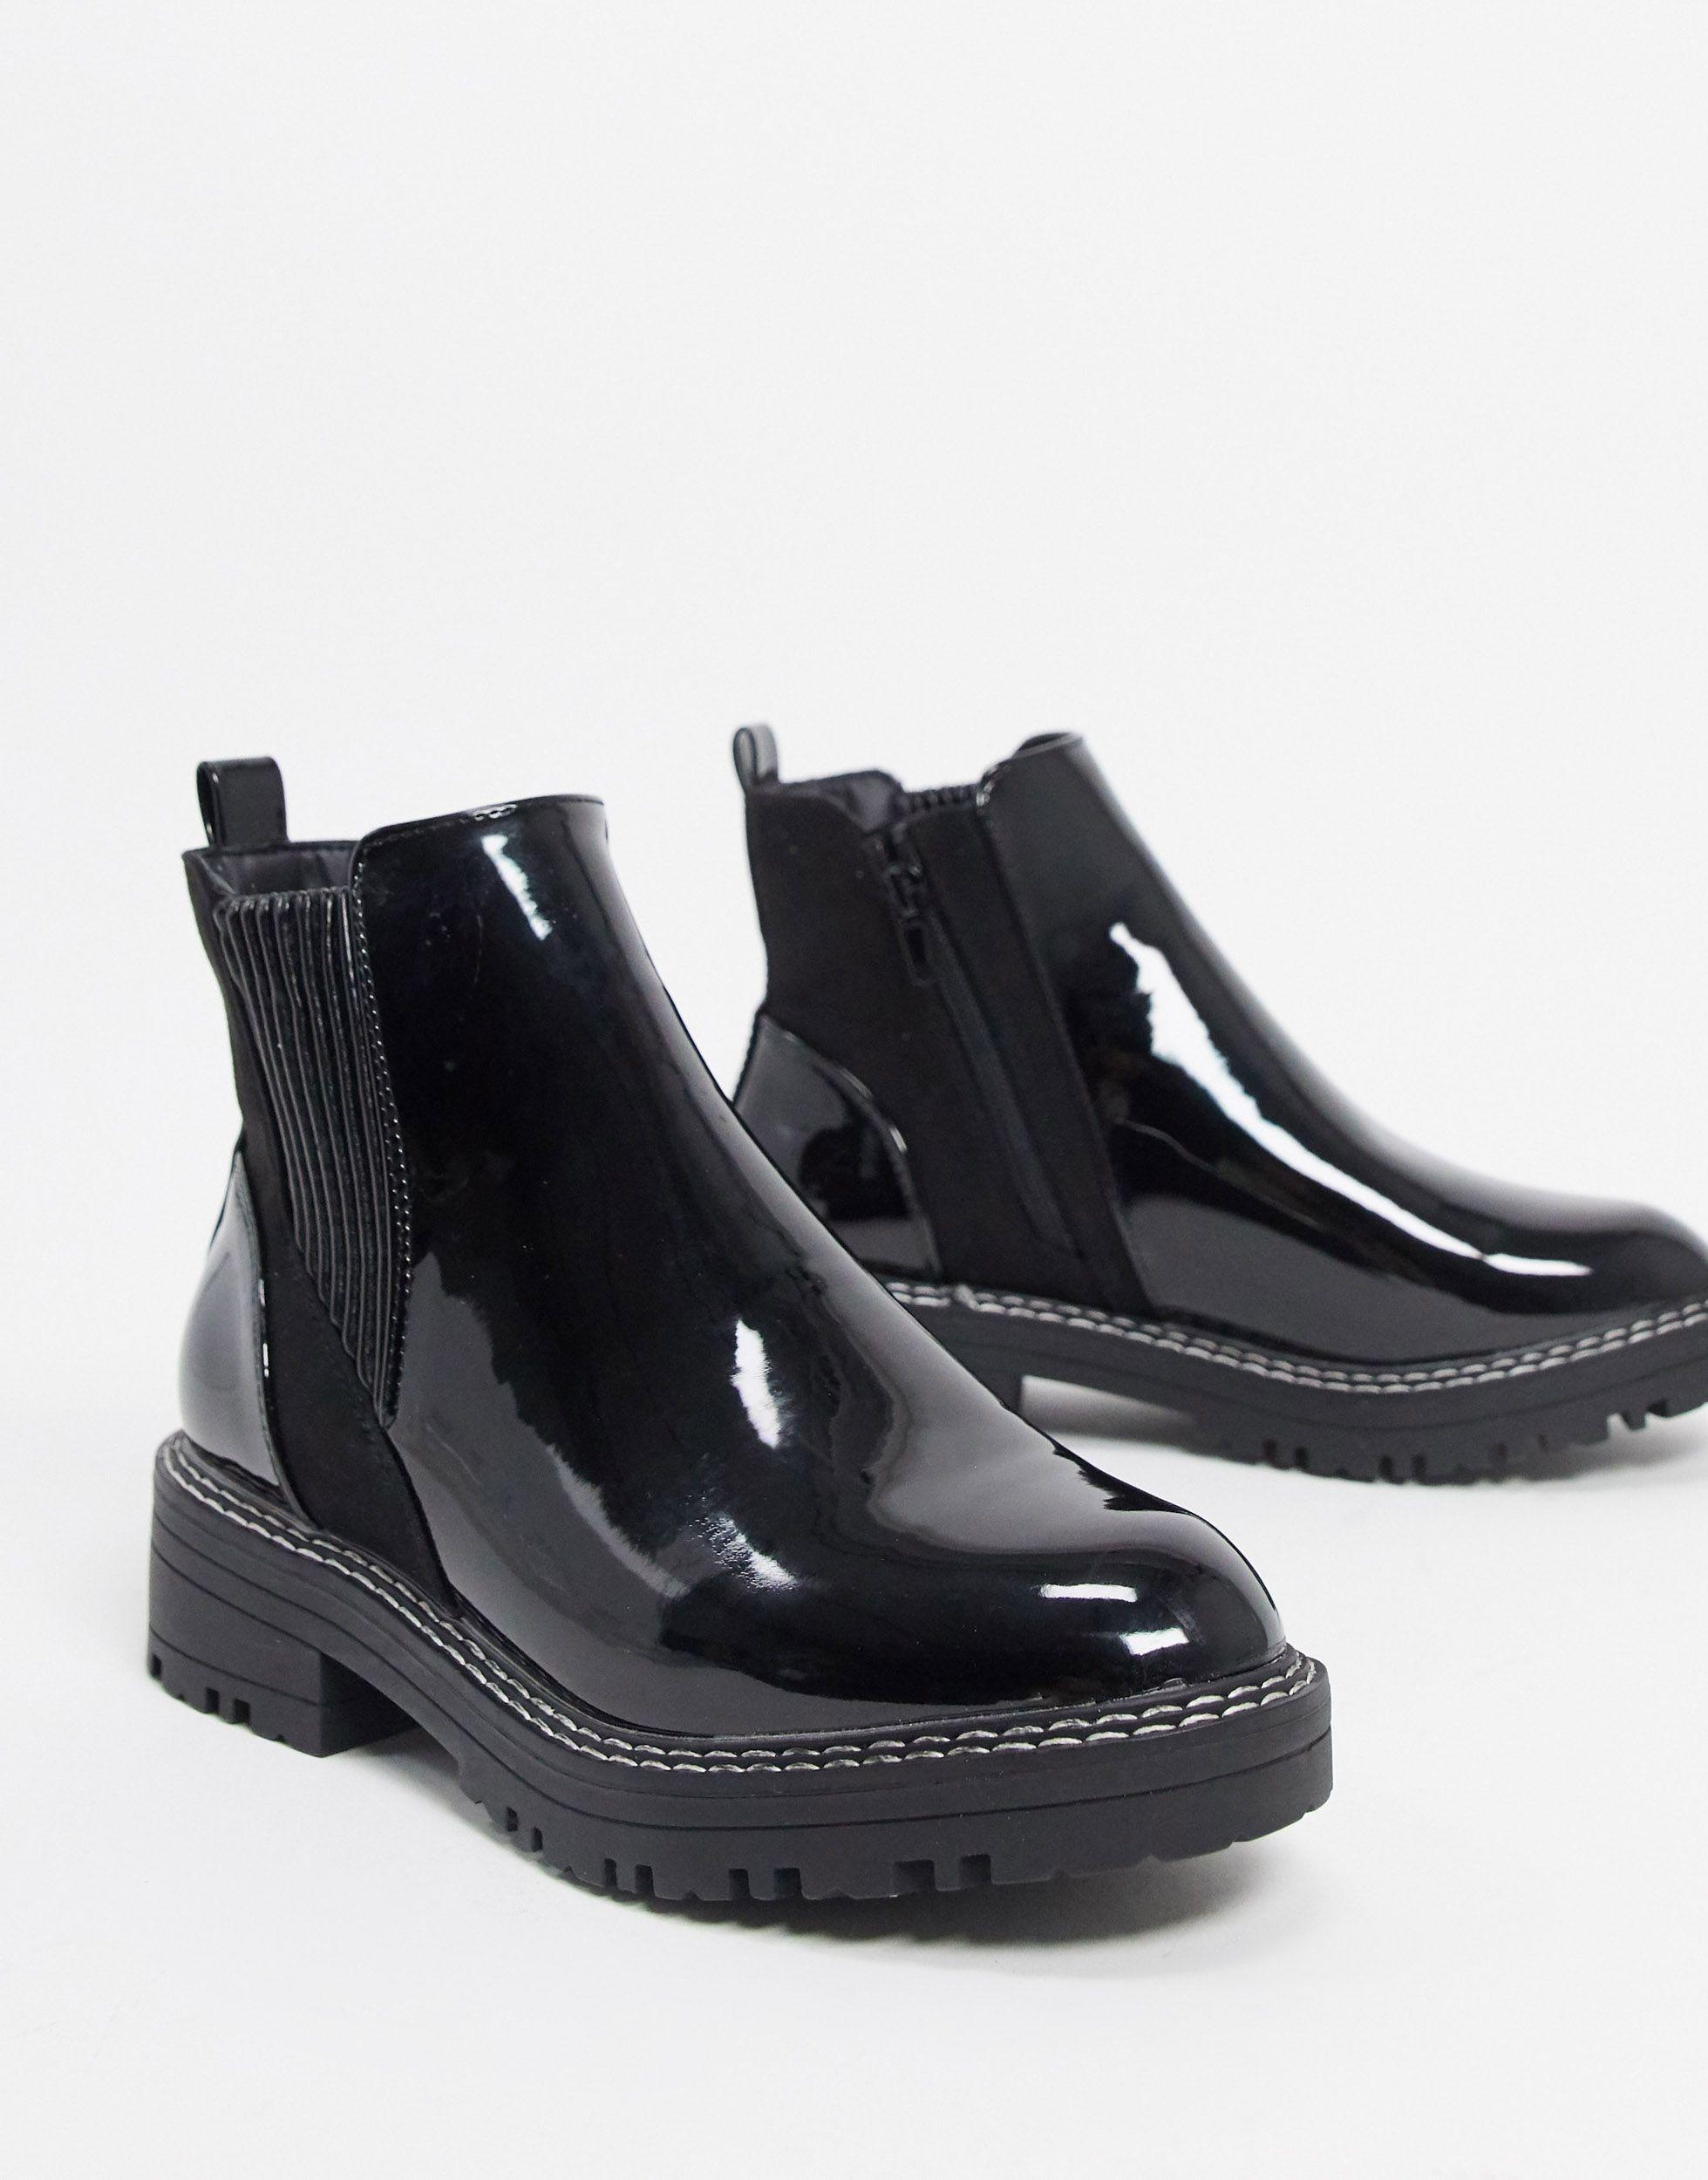 River Island Wide Fit Patent Chunky Chelsea Boot in Black | Lyst